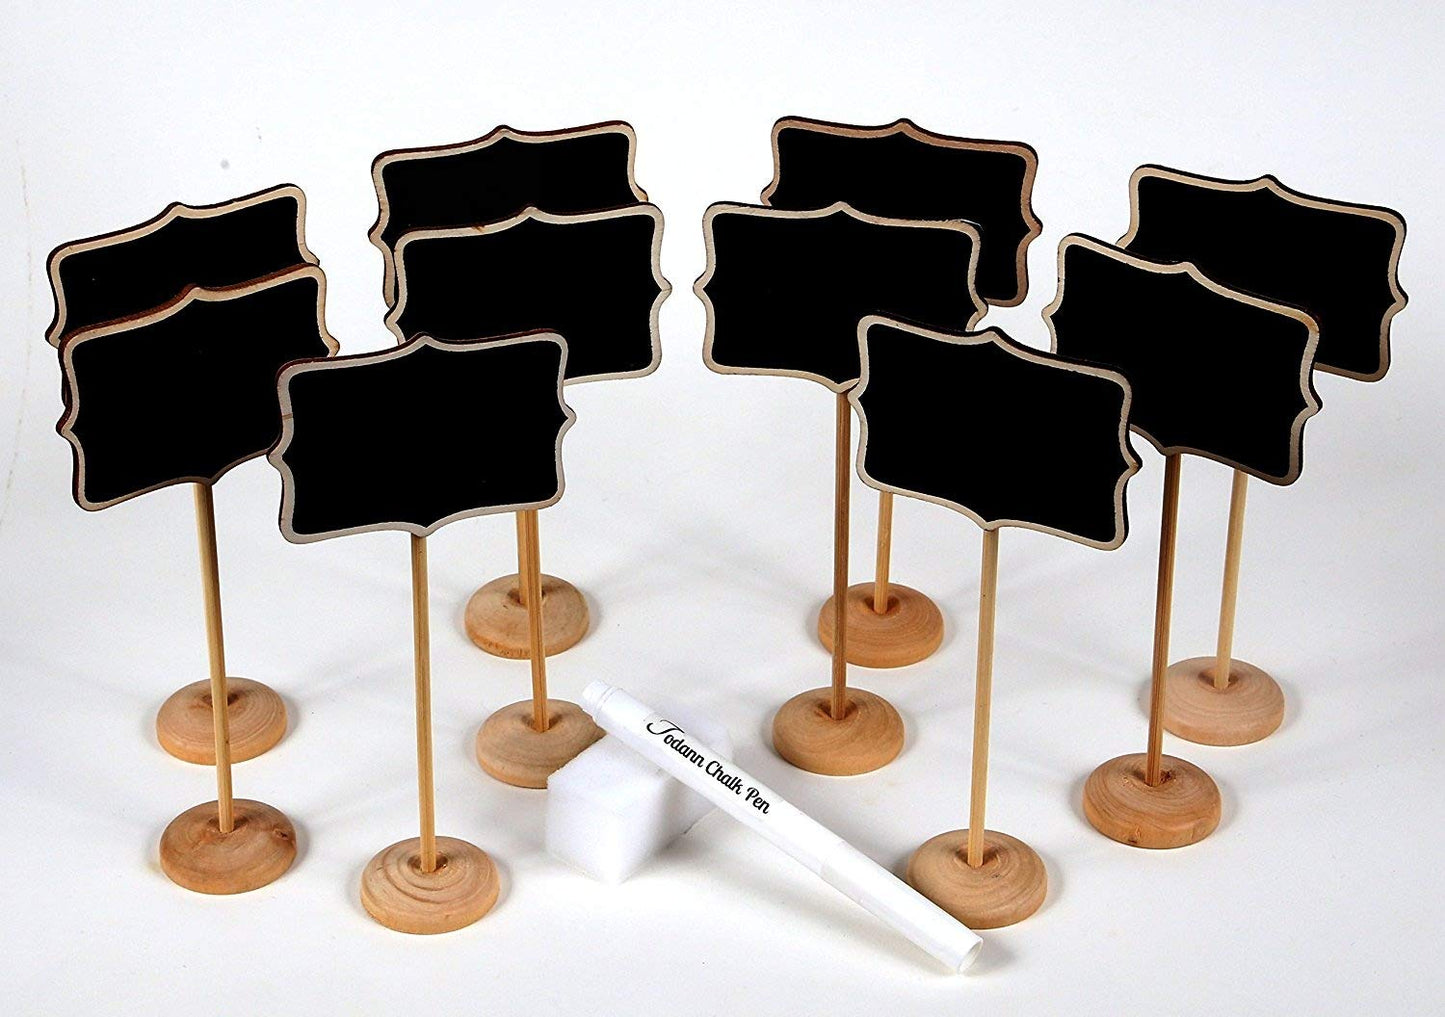 10 Piece Mini Rectangle Chalkboard Stands / Signs, White Liquid Chalk Pen & Erasing Sponge, use for Weddings, Parties, Table Numbers or Place Cards